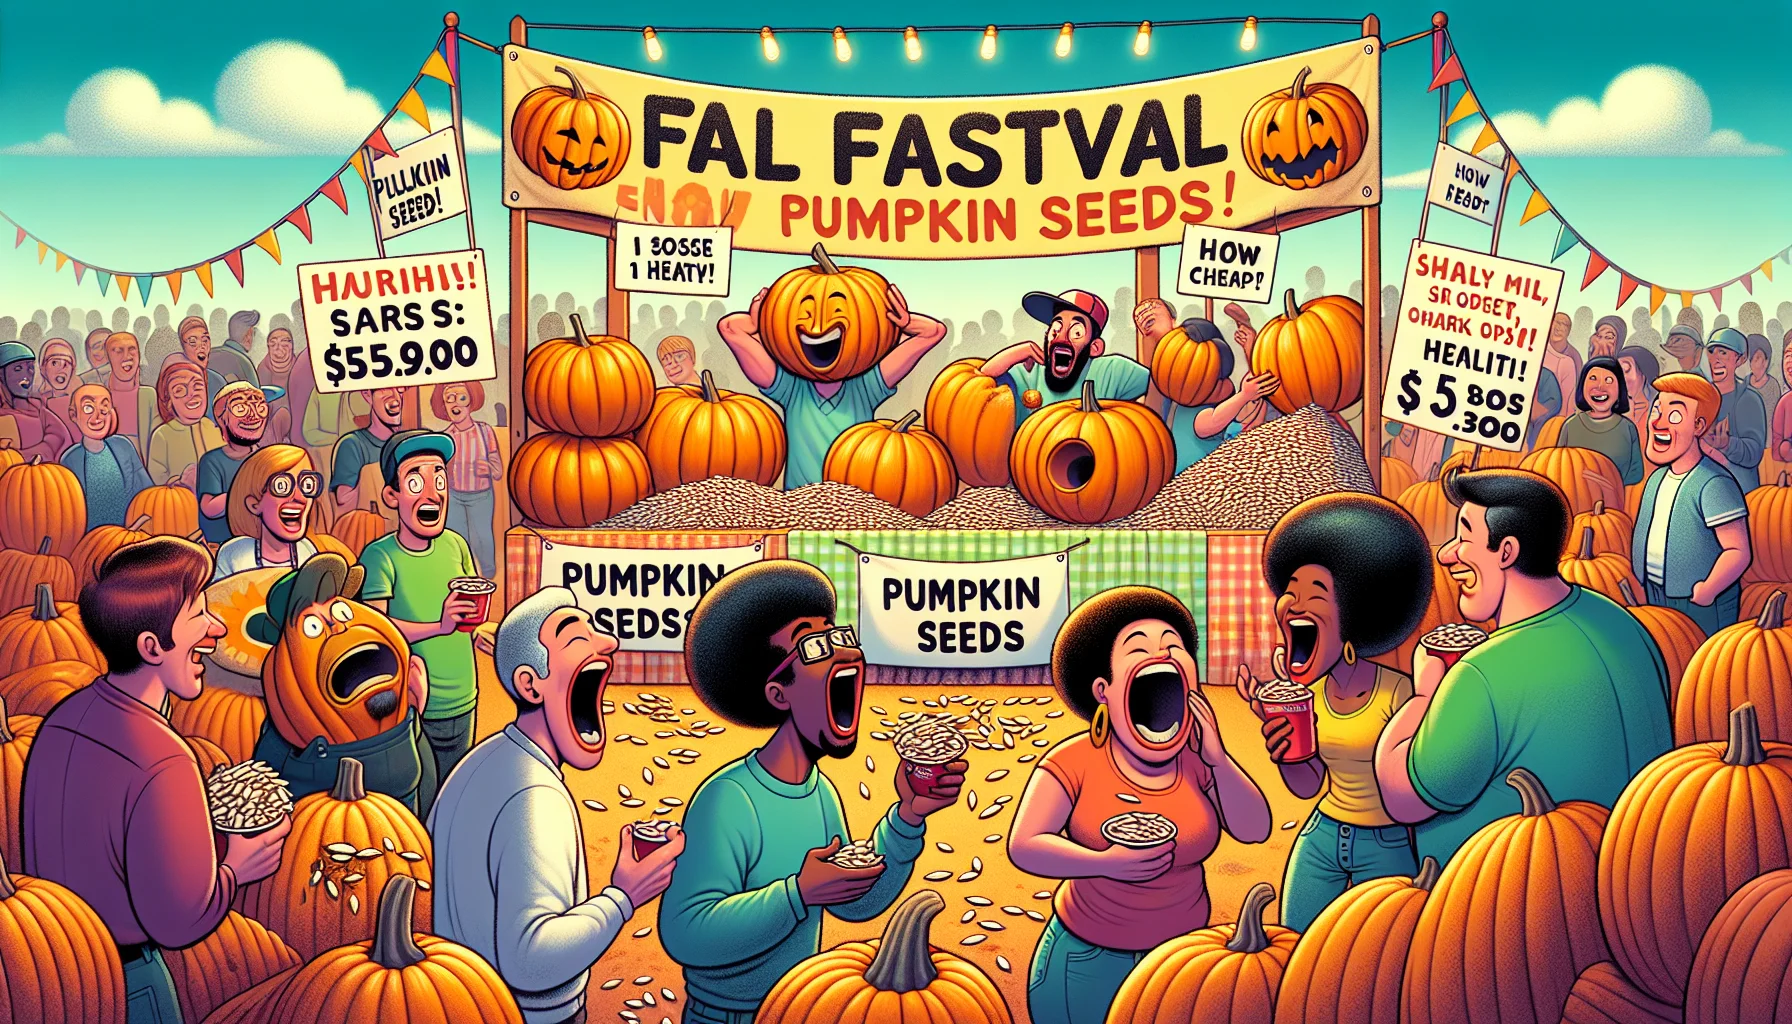 Depict a humor-filled fall festival scene. The main highlight is the pumpkin seeds. There are stands selling these nutritious treats at low prices to promote healthy eating. Visitors of diverse descents and genders are interacting with the vendors and each other, expressing surprise, delight, and amusement at the pumpkin seed theme. They are seen feasting on the pumpkin seeds while laughing and having fun. There are banners and signs promoting the health benefits of pumpkin seeds and showing how cheap they are in this festival. The scene is infused with the vibrant colors and warmth of fall.